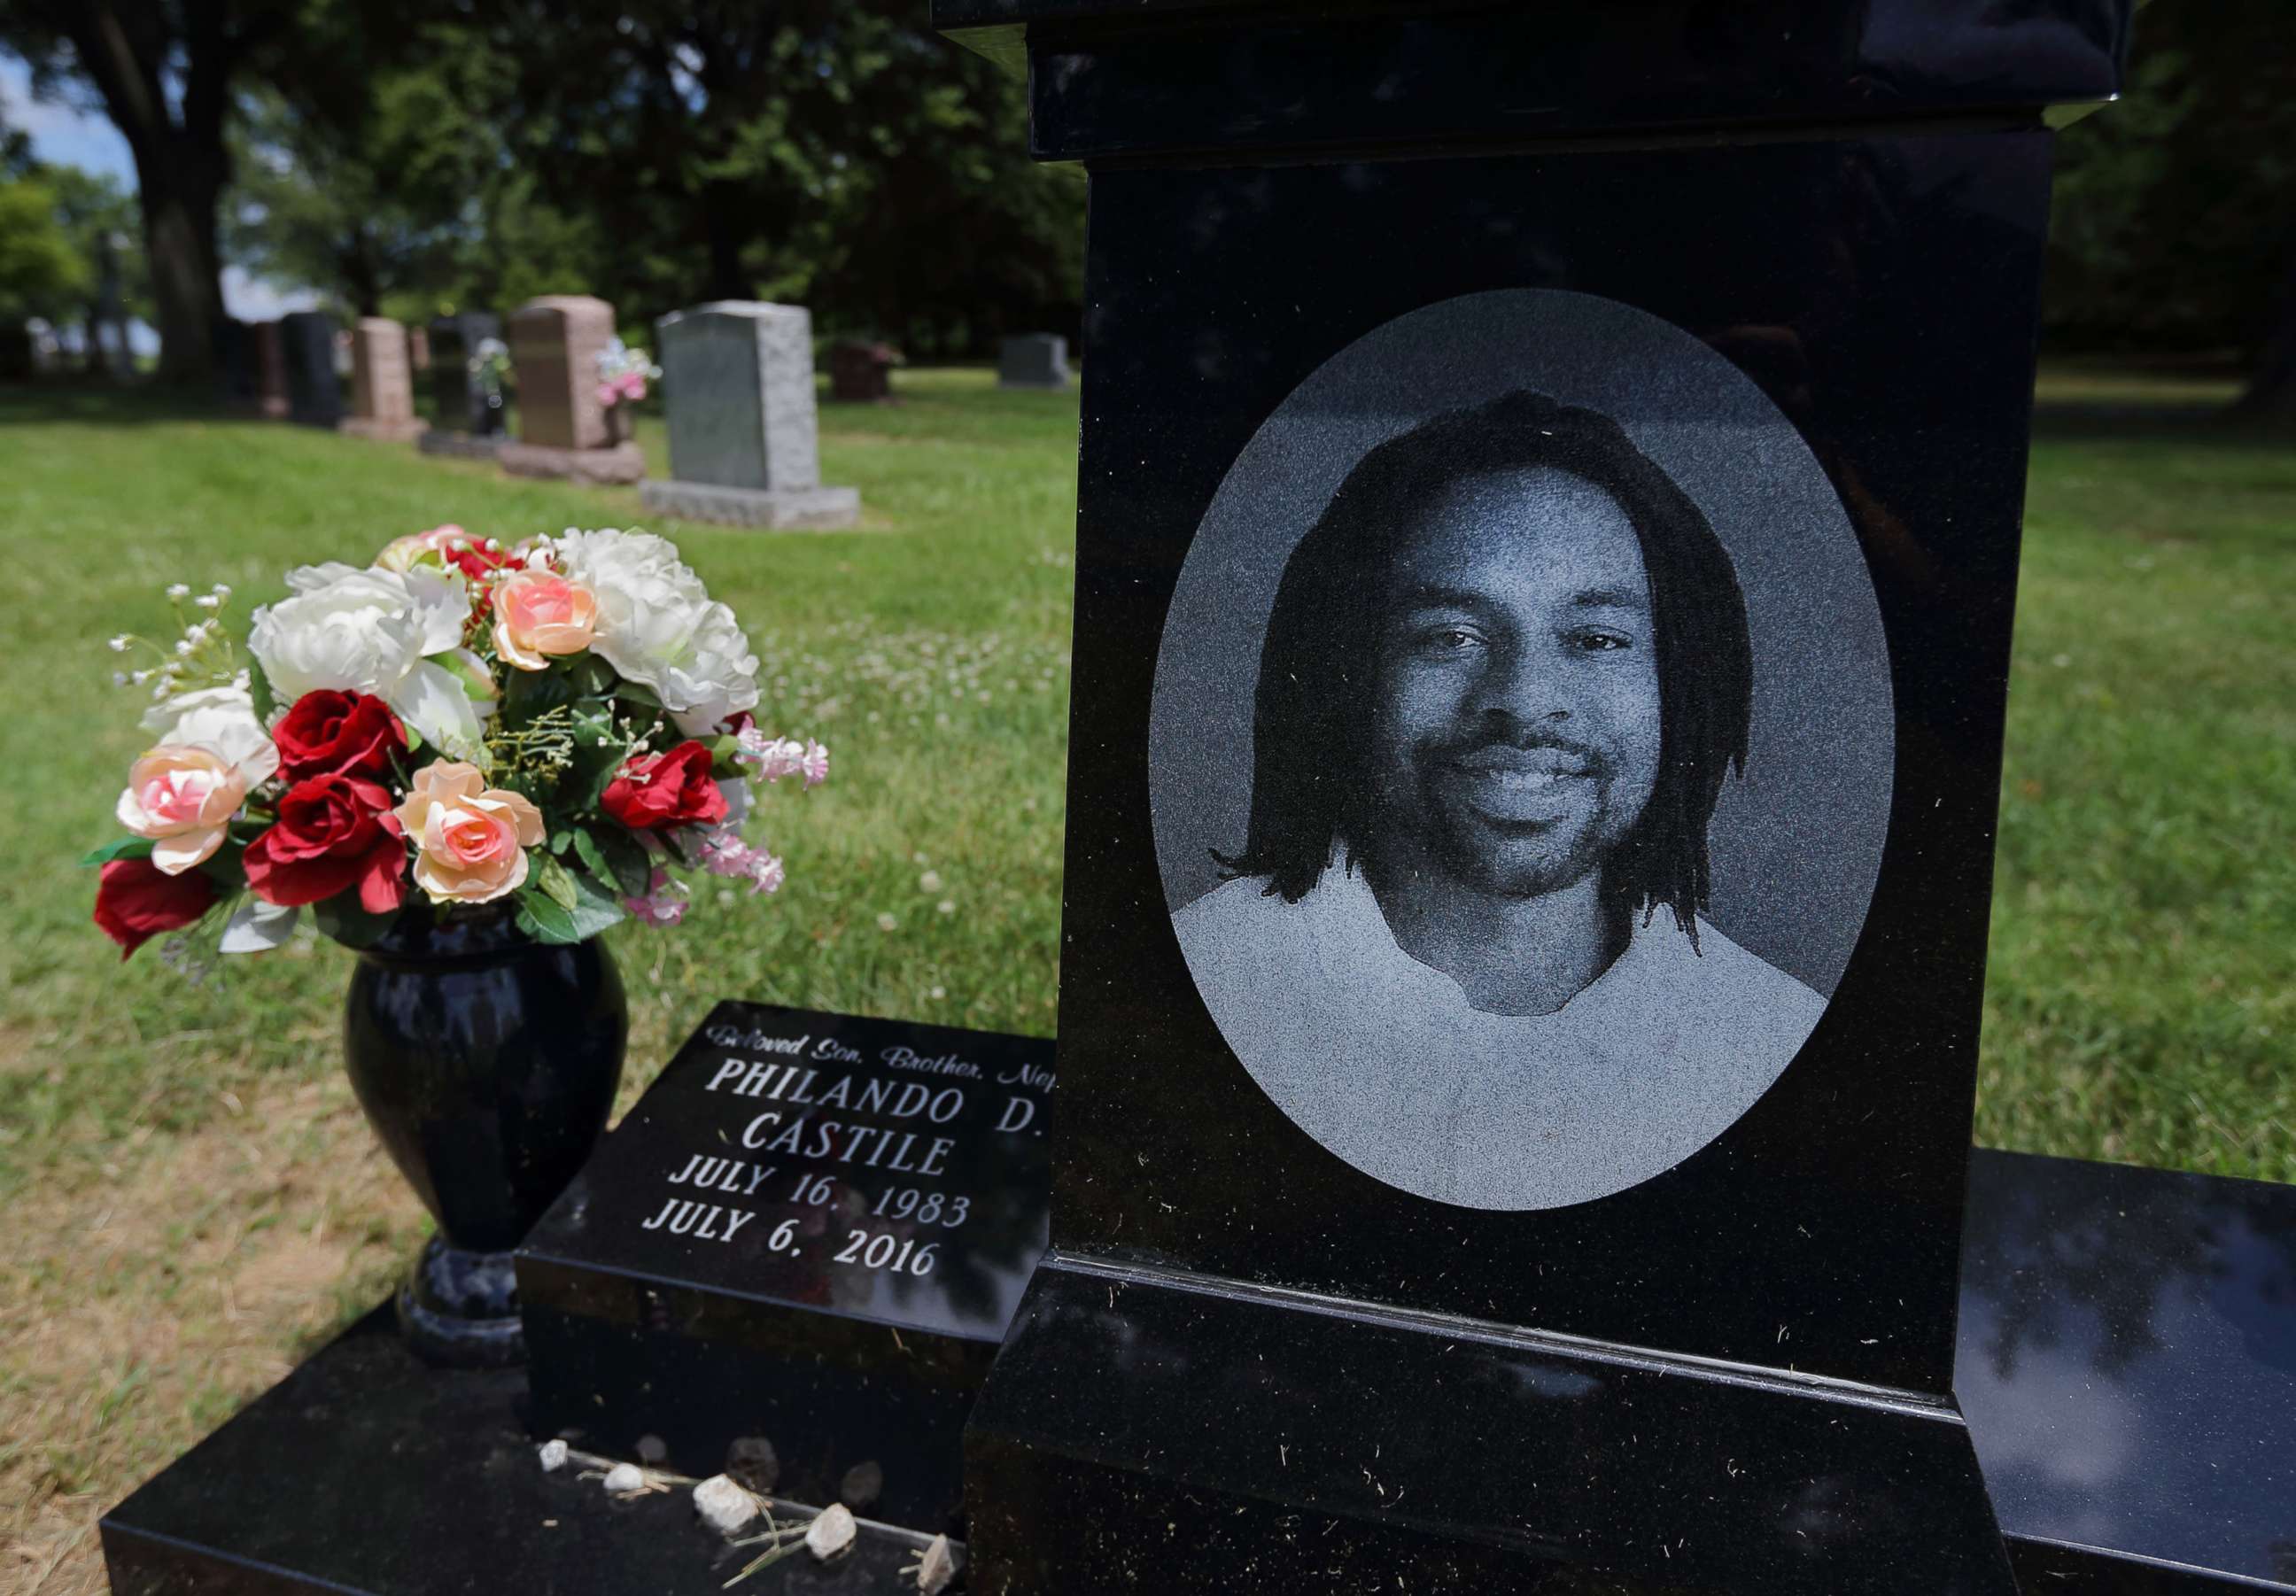 PHOTO: The grave of Philando Castile at Calvary Cemetery in St. Louis on the one-year anniversary of his death, July 6, 2017.